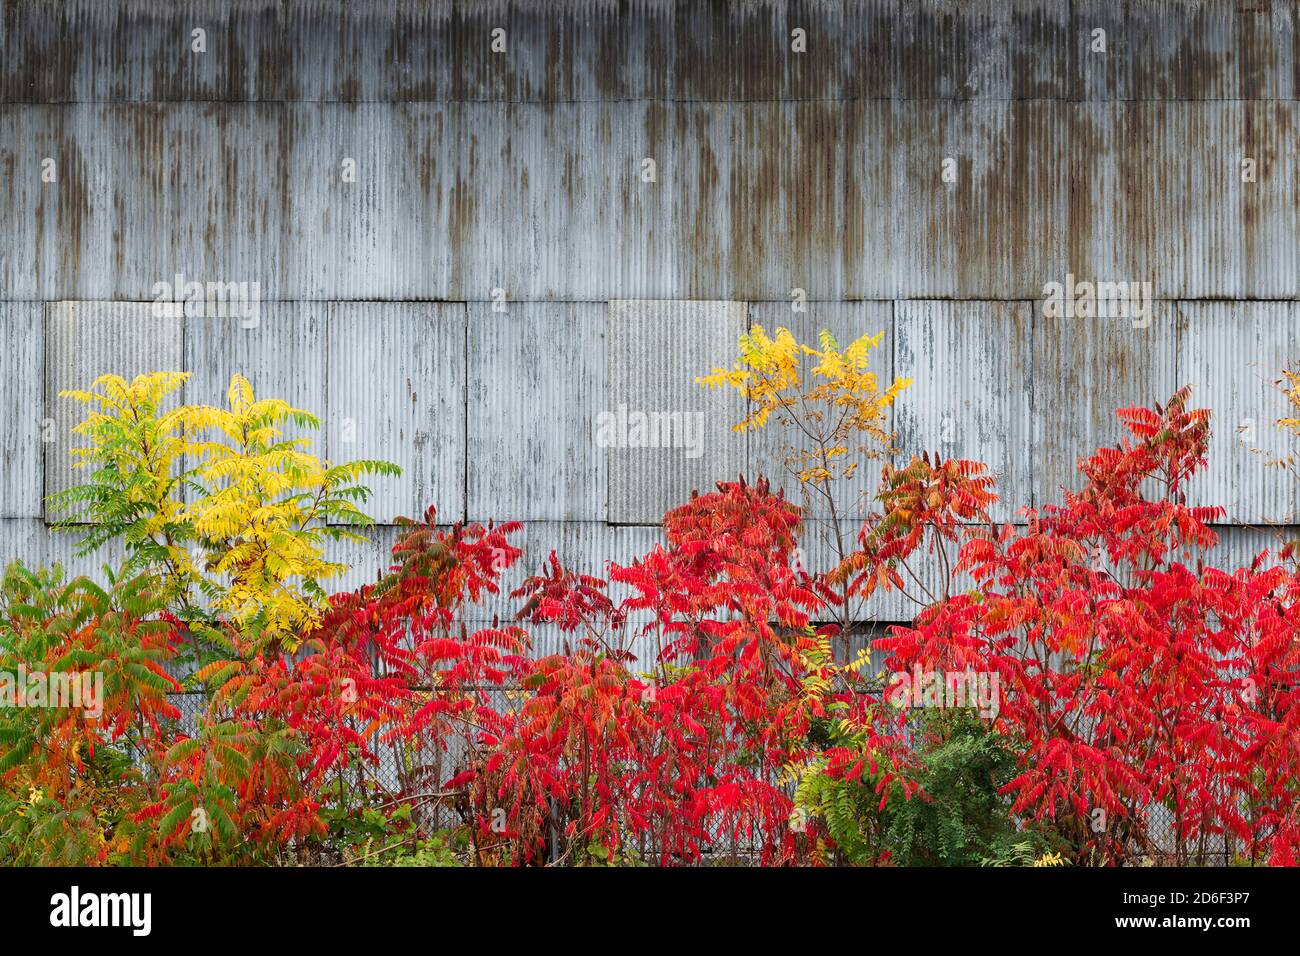 Autumn colors of bushes along fence in front of aluminum siding wall Stock Photo